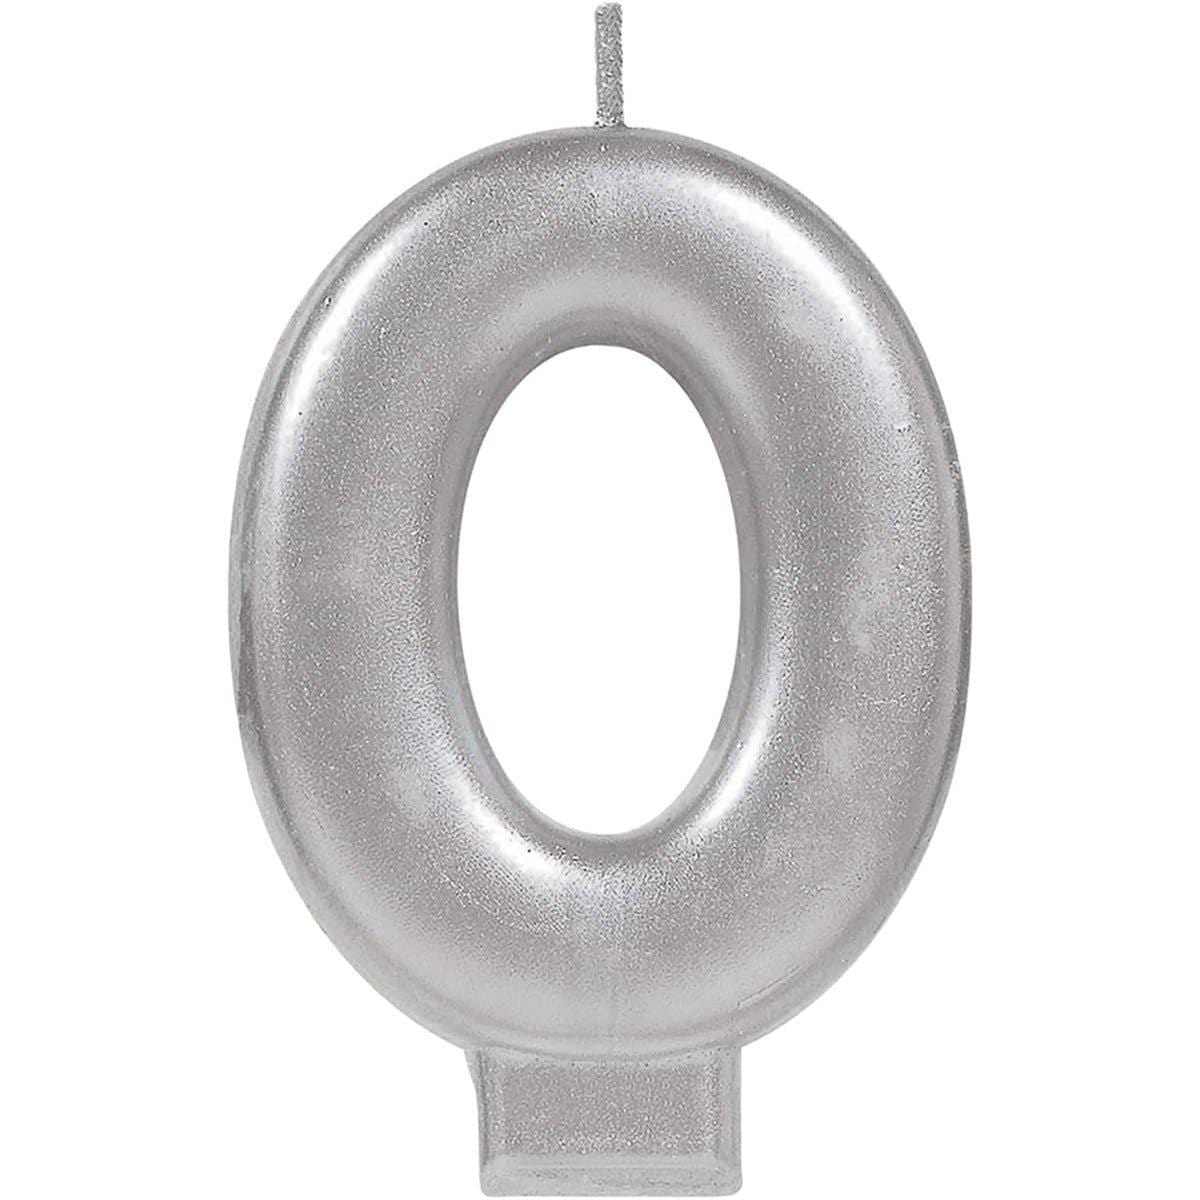 Buy Cake Supplies Metallic Numeral Candle #0 - Silver sold at Party Expert